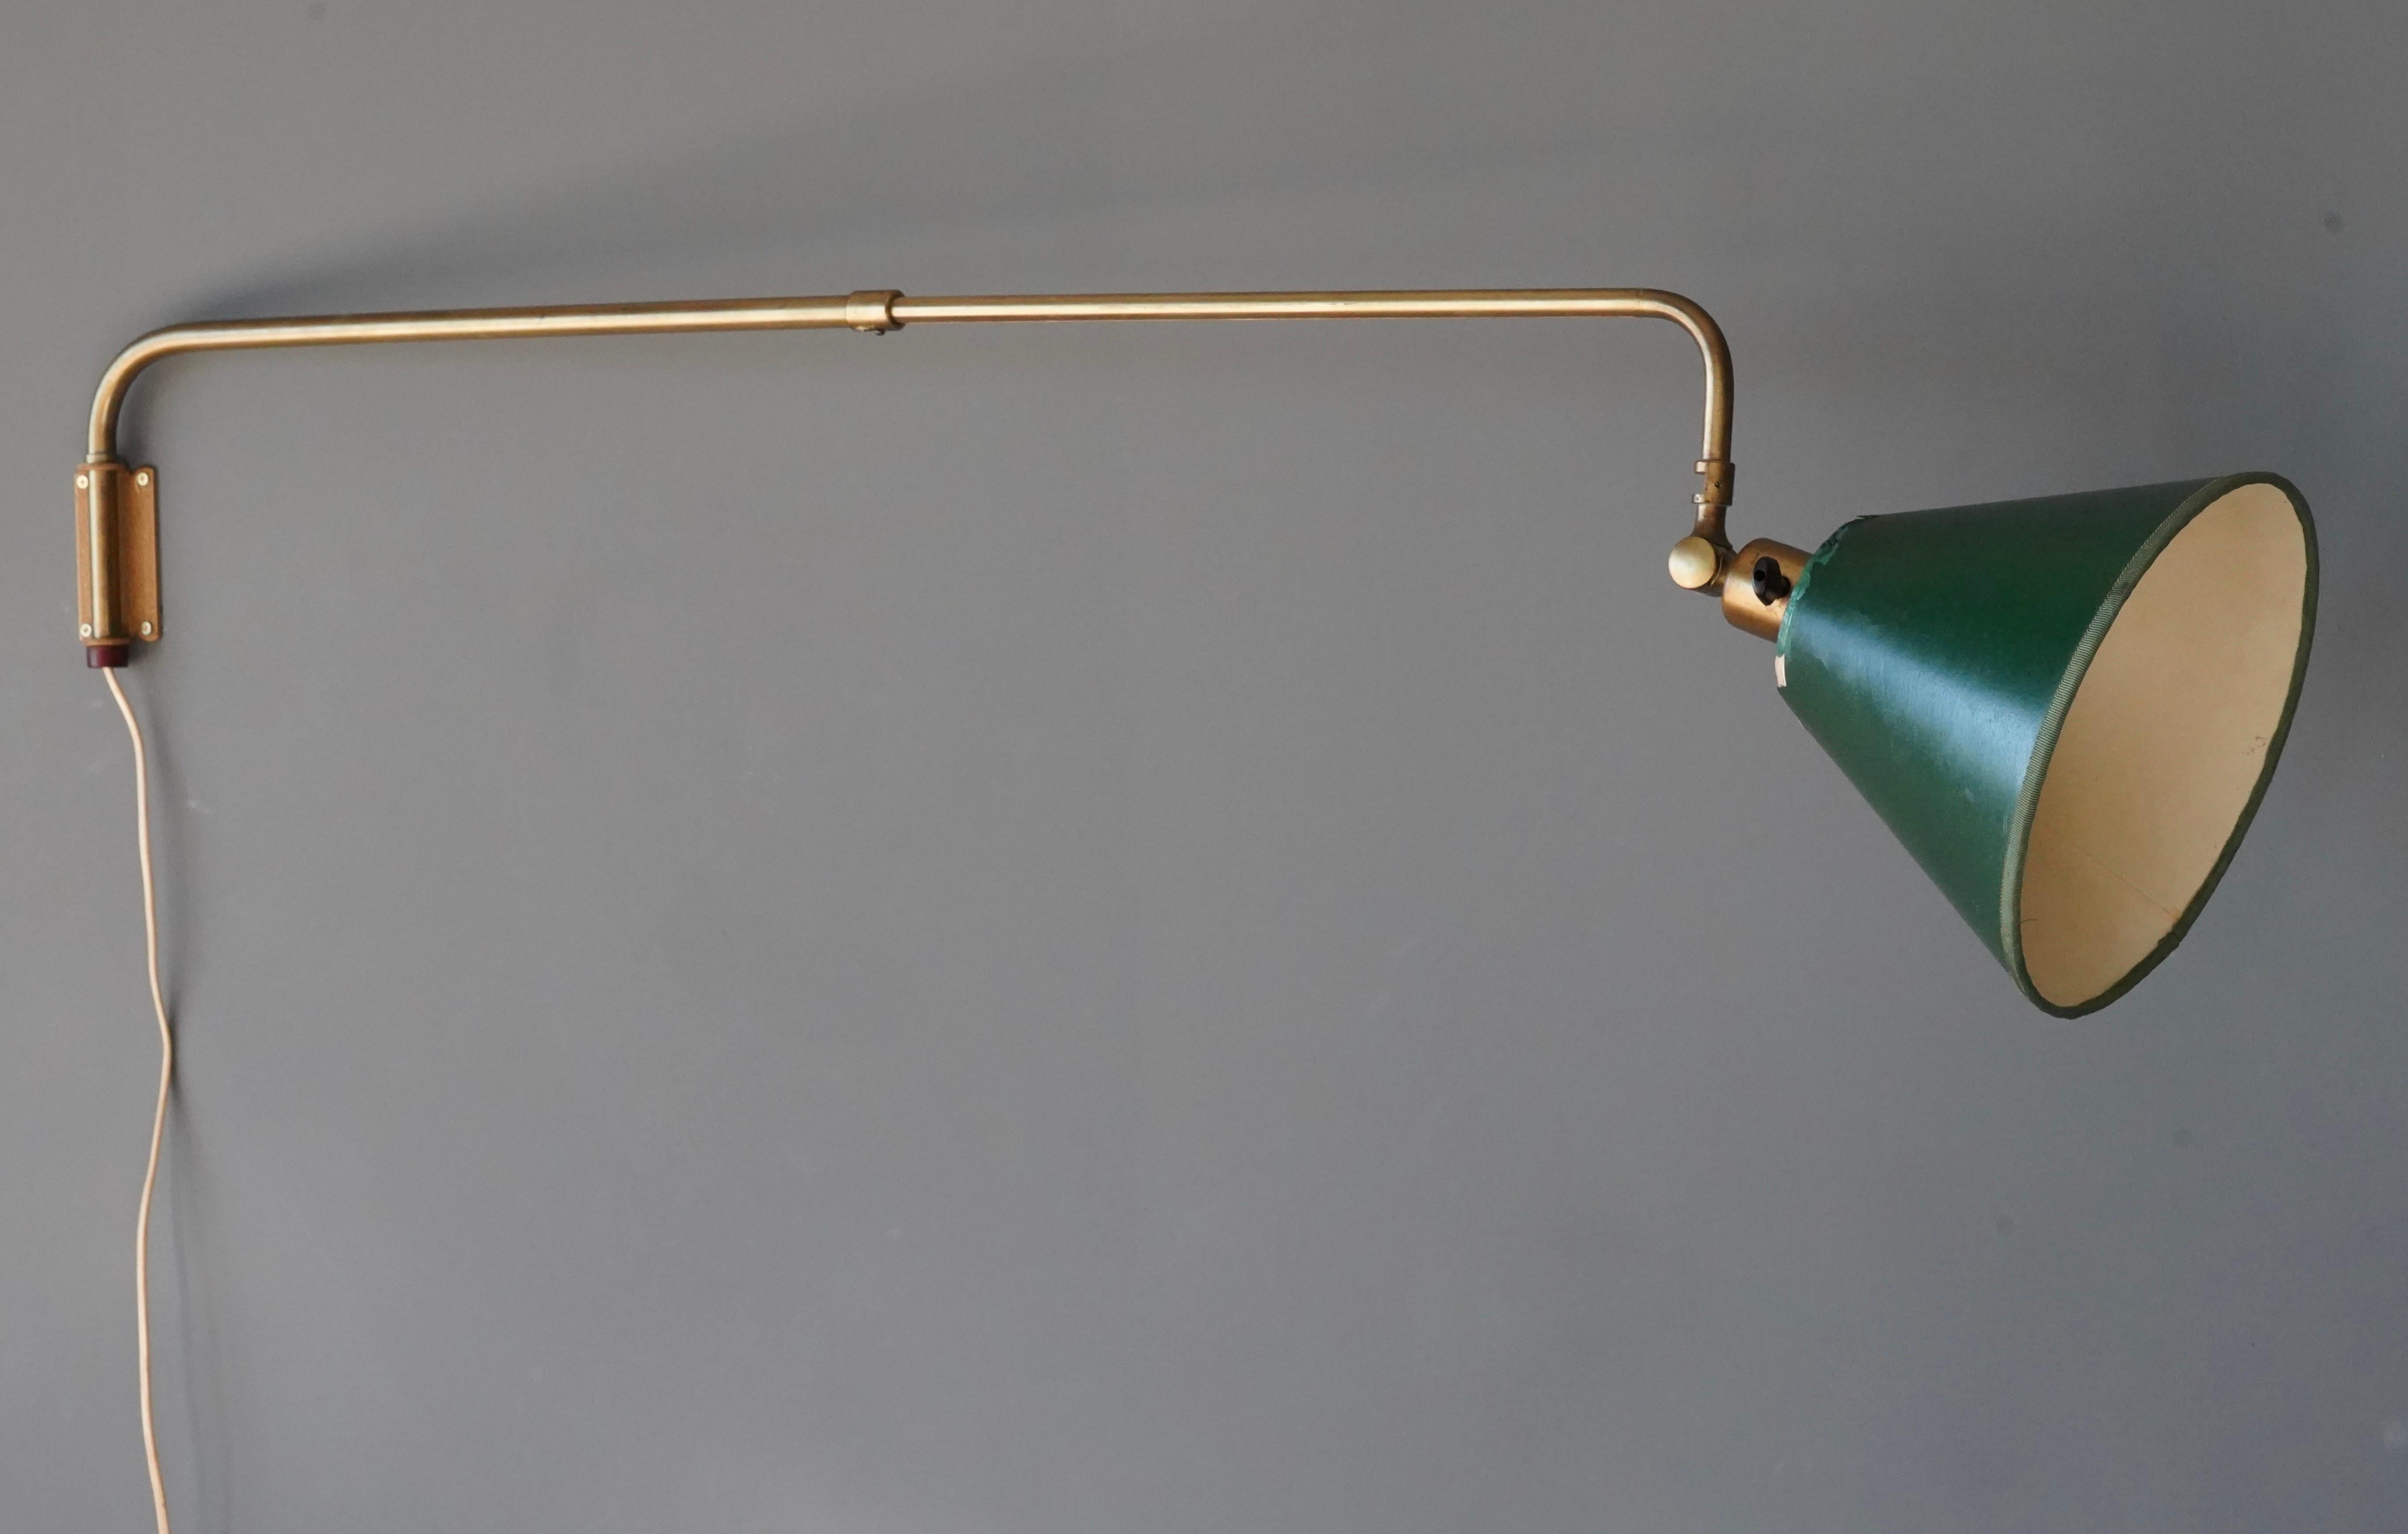 An adjustable organic wall light. In brass, with a vintage lampshade, likely original, in lacquered green fabric.

Dimensions are as pictured at the shortest position. Width can be extended to an additional 16 inches.